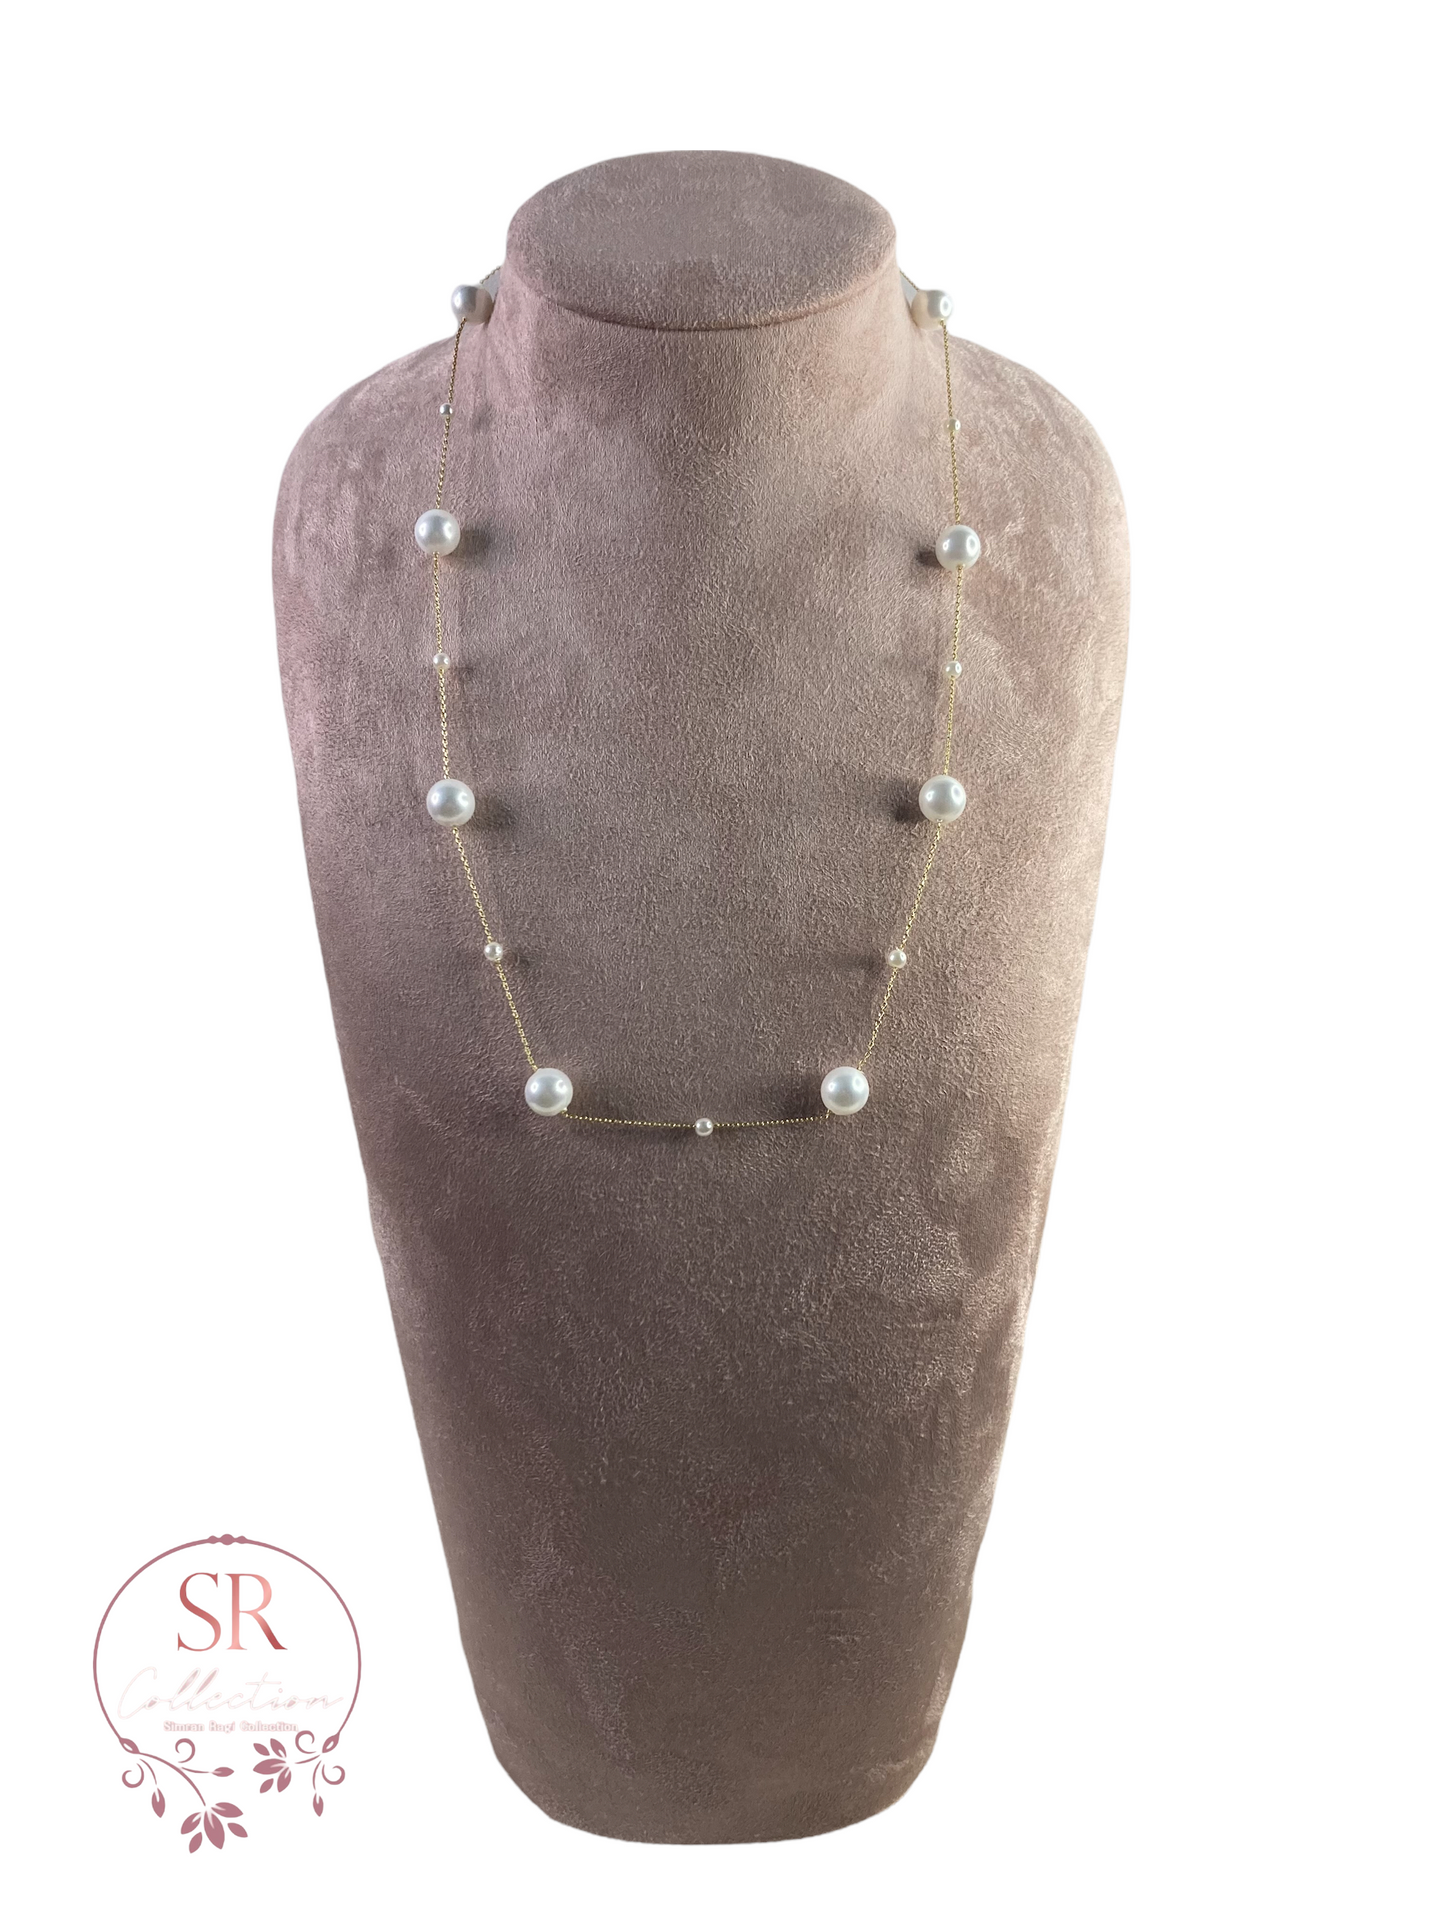 Blake Dainty Pearl Necklace (ST080)